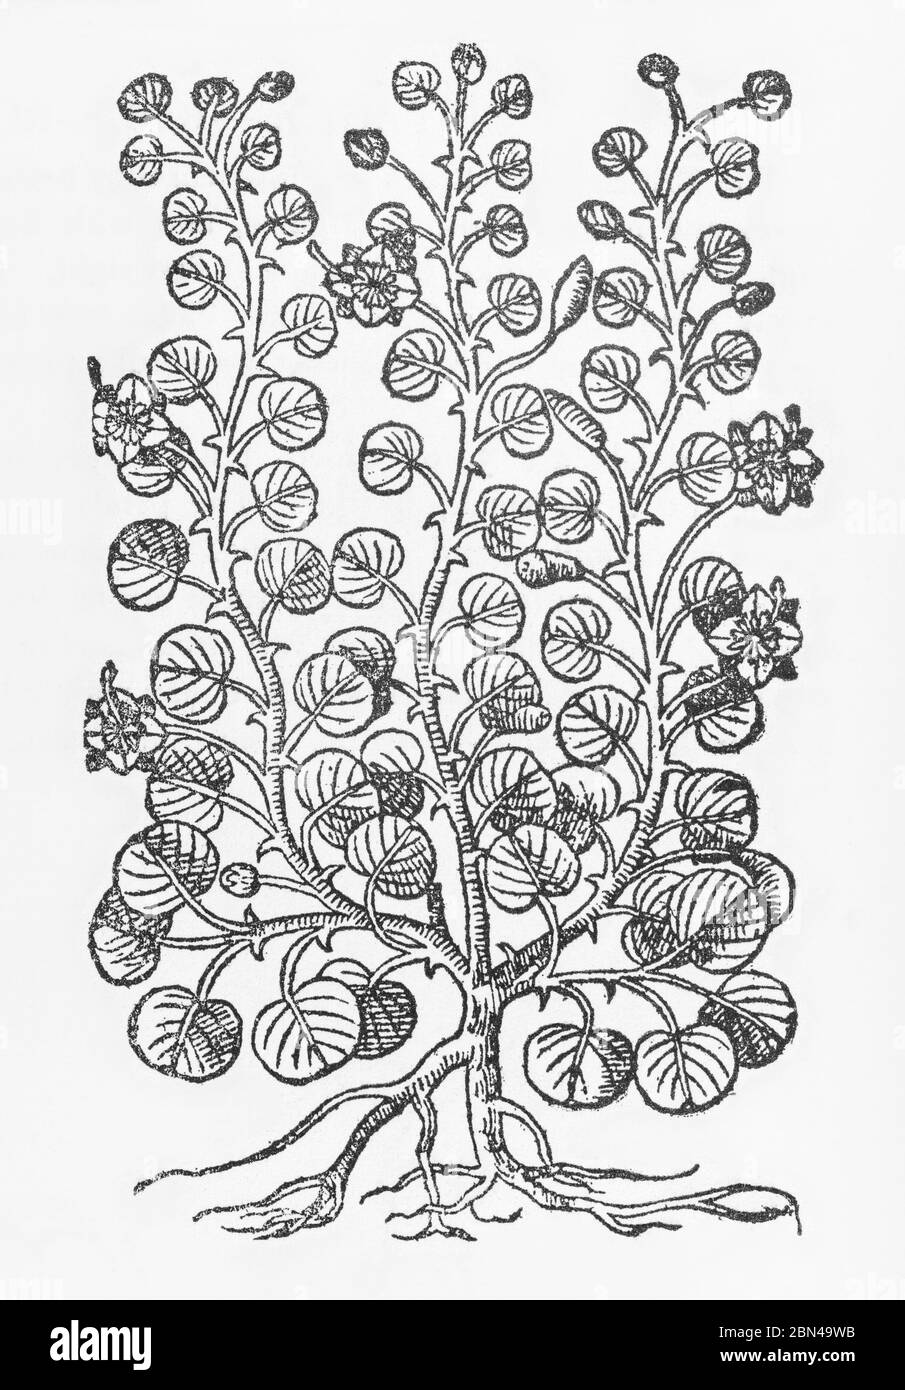 Common Caper / Capparis spinosa plant woodcut from Gerarde's Herball, History of Plants. He refers to it as round leaf variety - C. rotundiore folio. Stock Photo